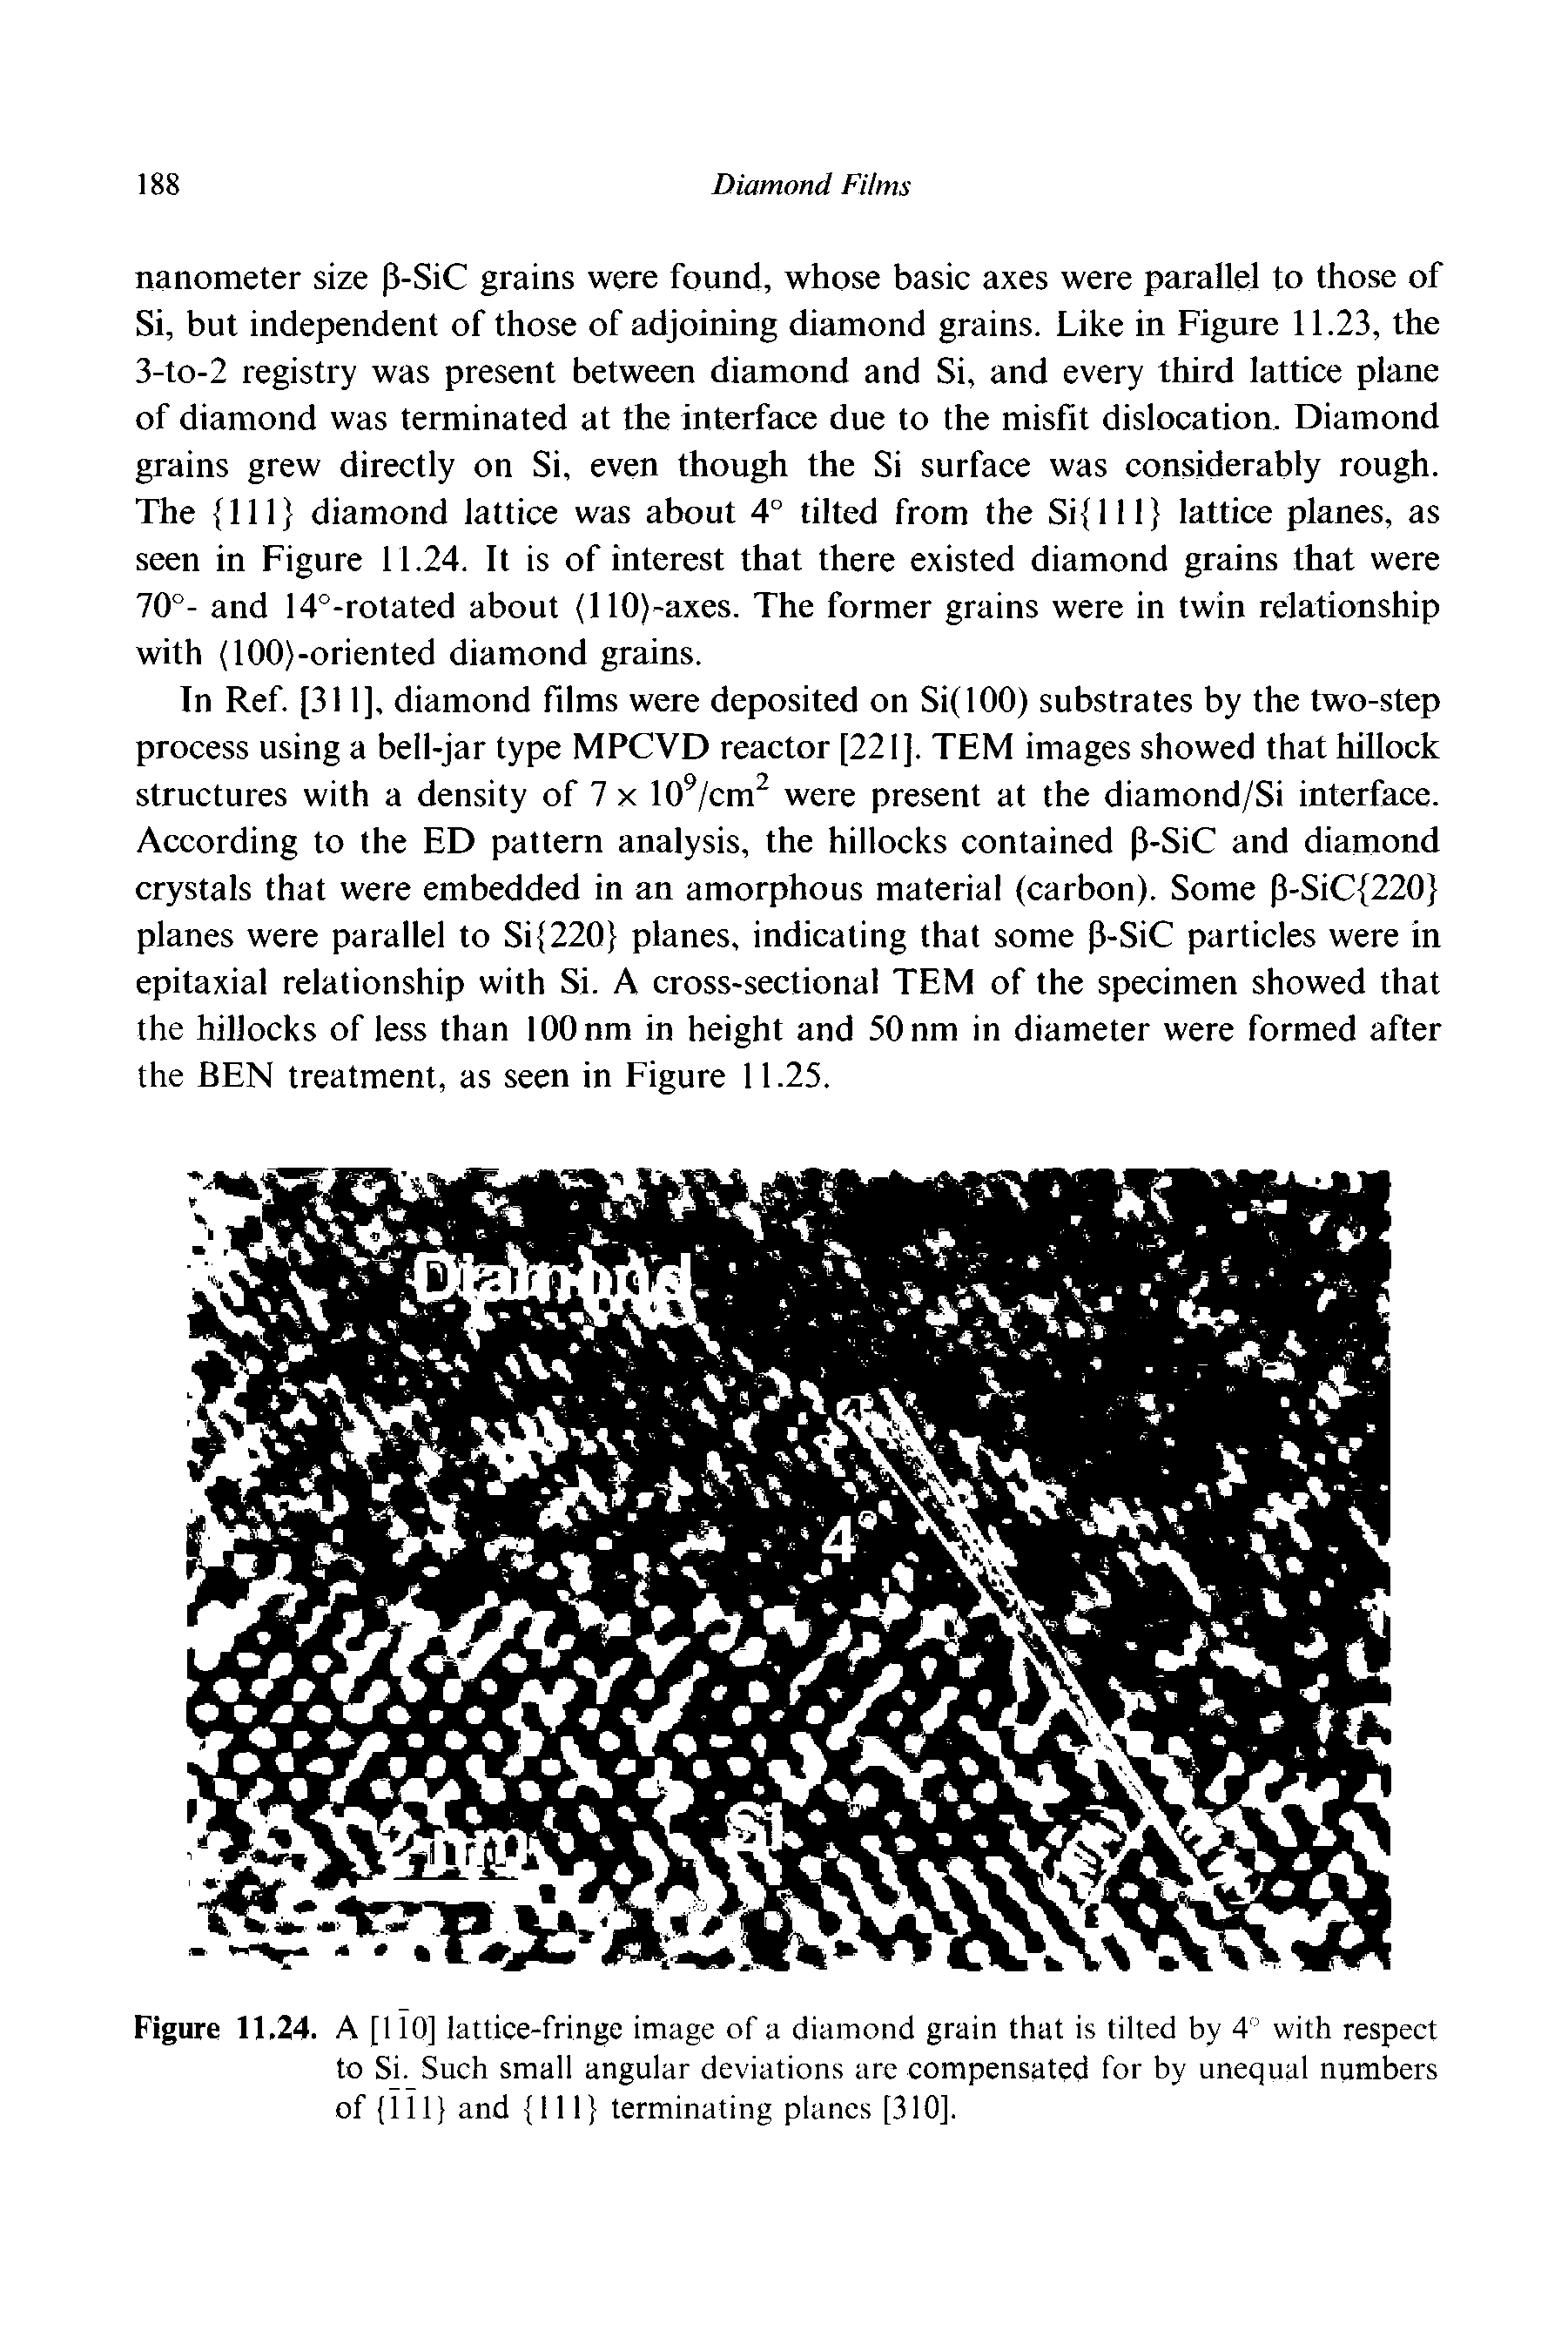 Figure 11.24. A [110] lattice-fringe image of a diamond grain that is tilted by 4° with respect to Si. Such small angular deviations arc compensated for by unequal numbers of iil and 111 terminating planes [310].